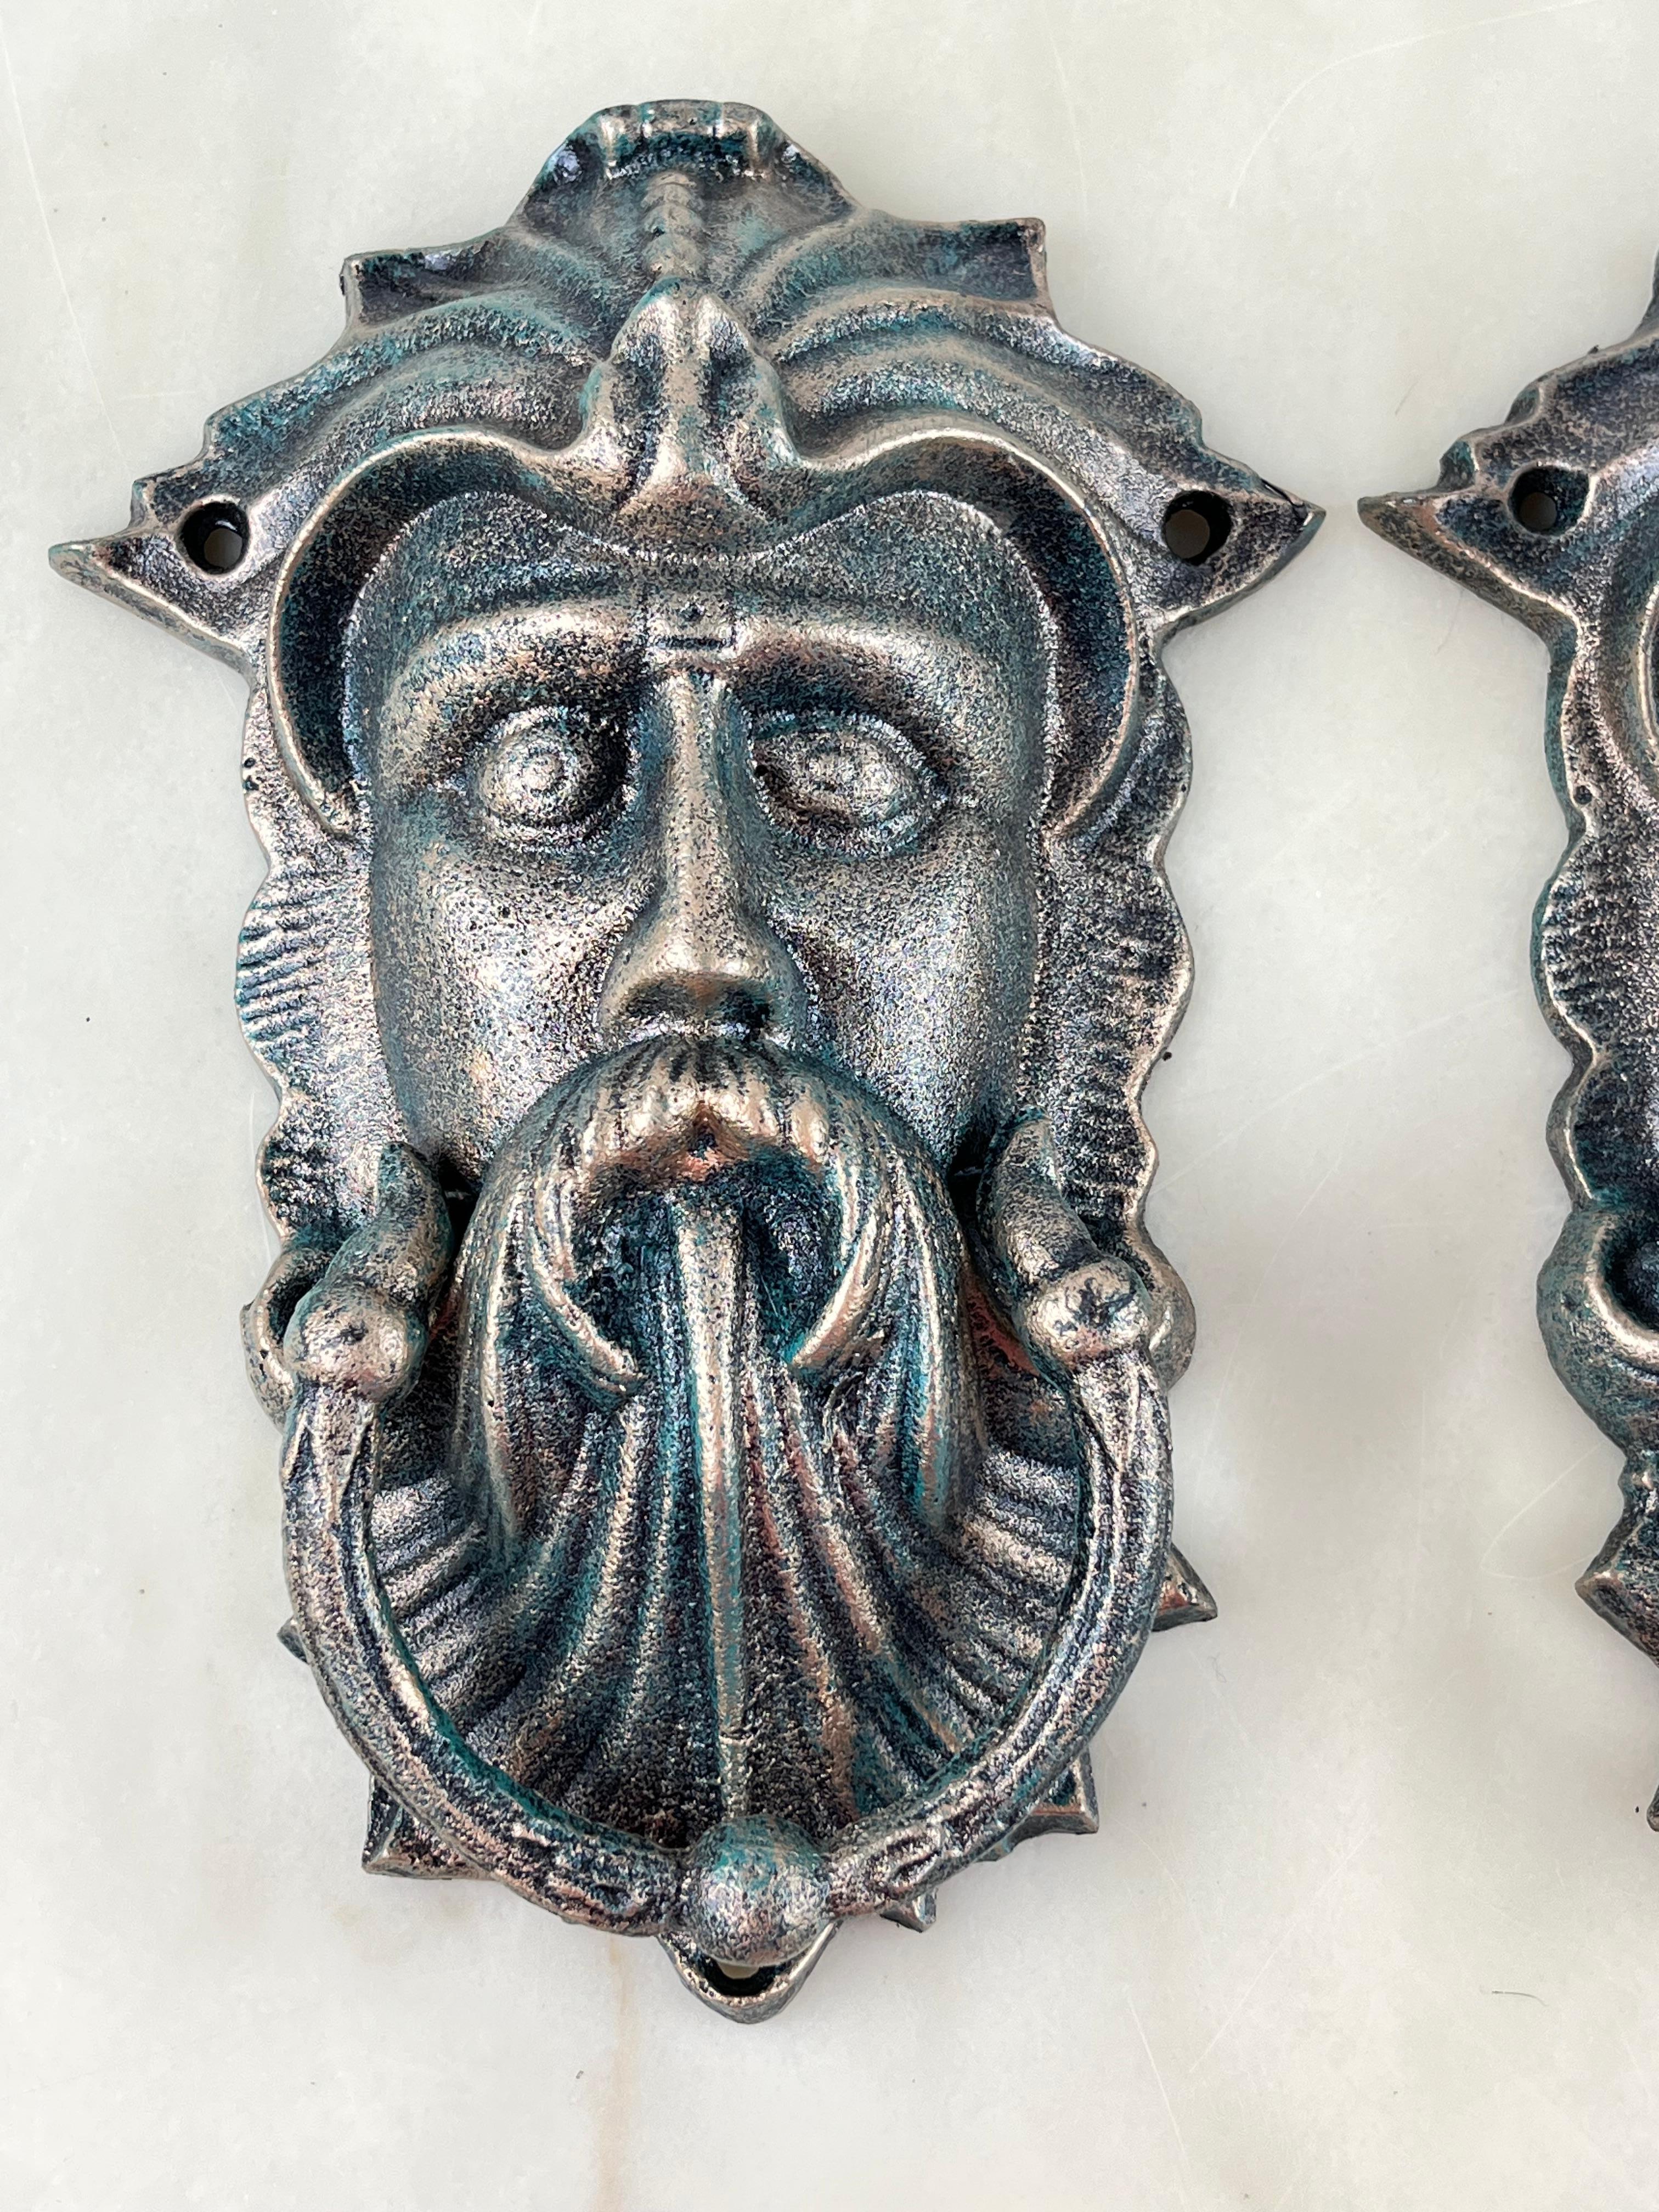 Pair of bronze door knockers, Italy, 1980s
Found in a warehouse, they have never been used. Intact and in excellent condition. Small signs of aging.